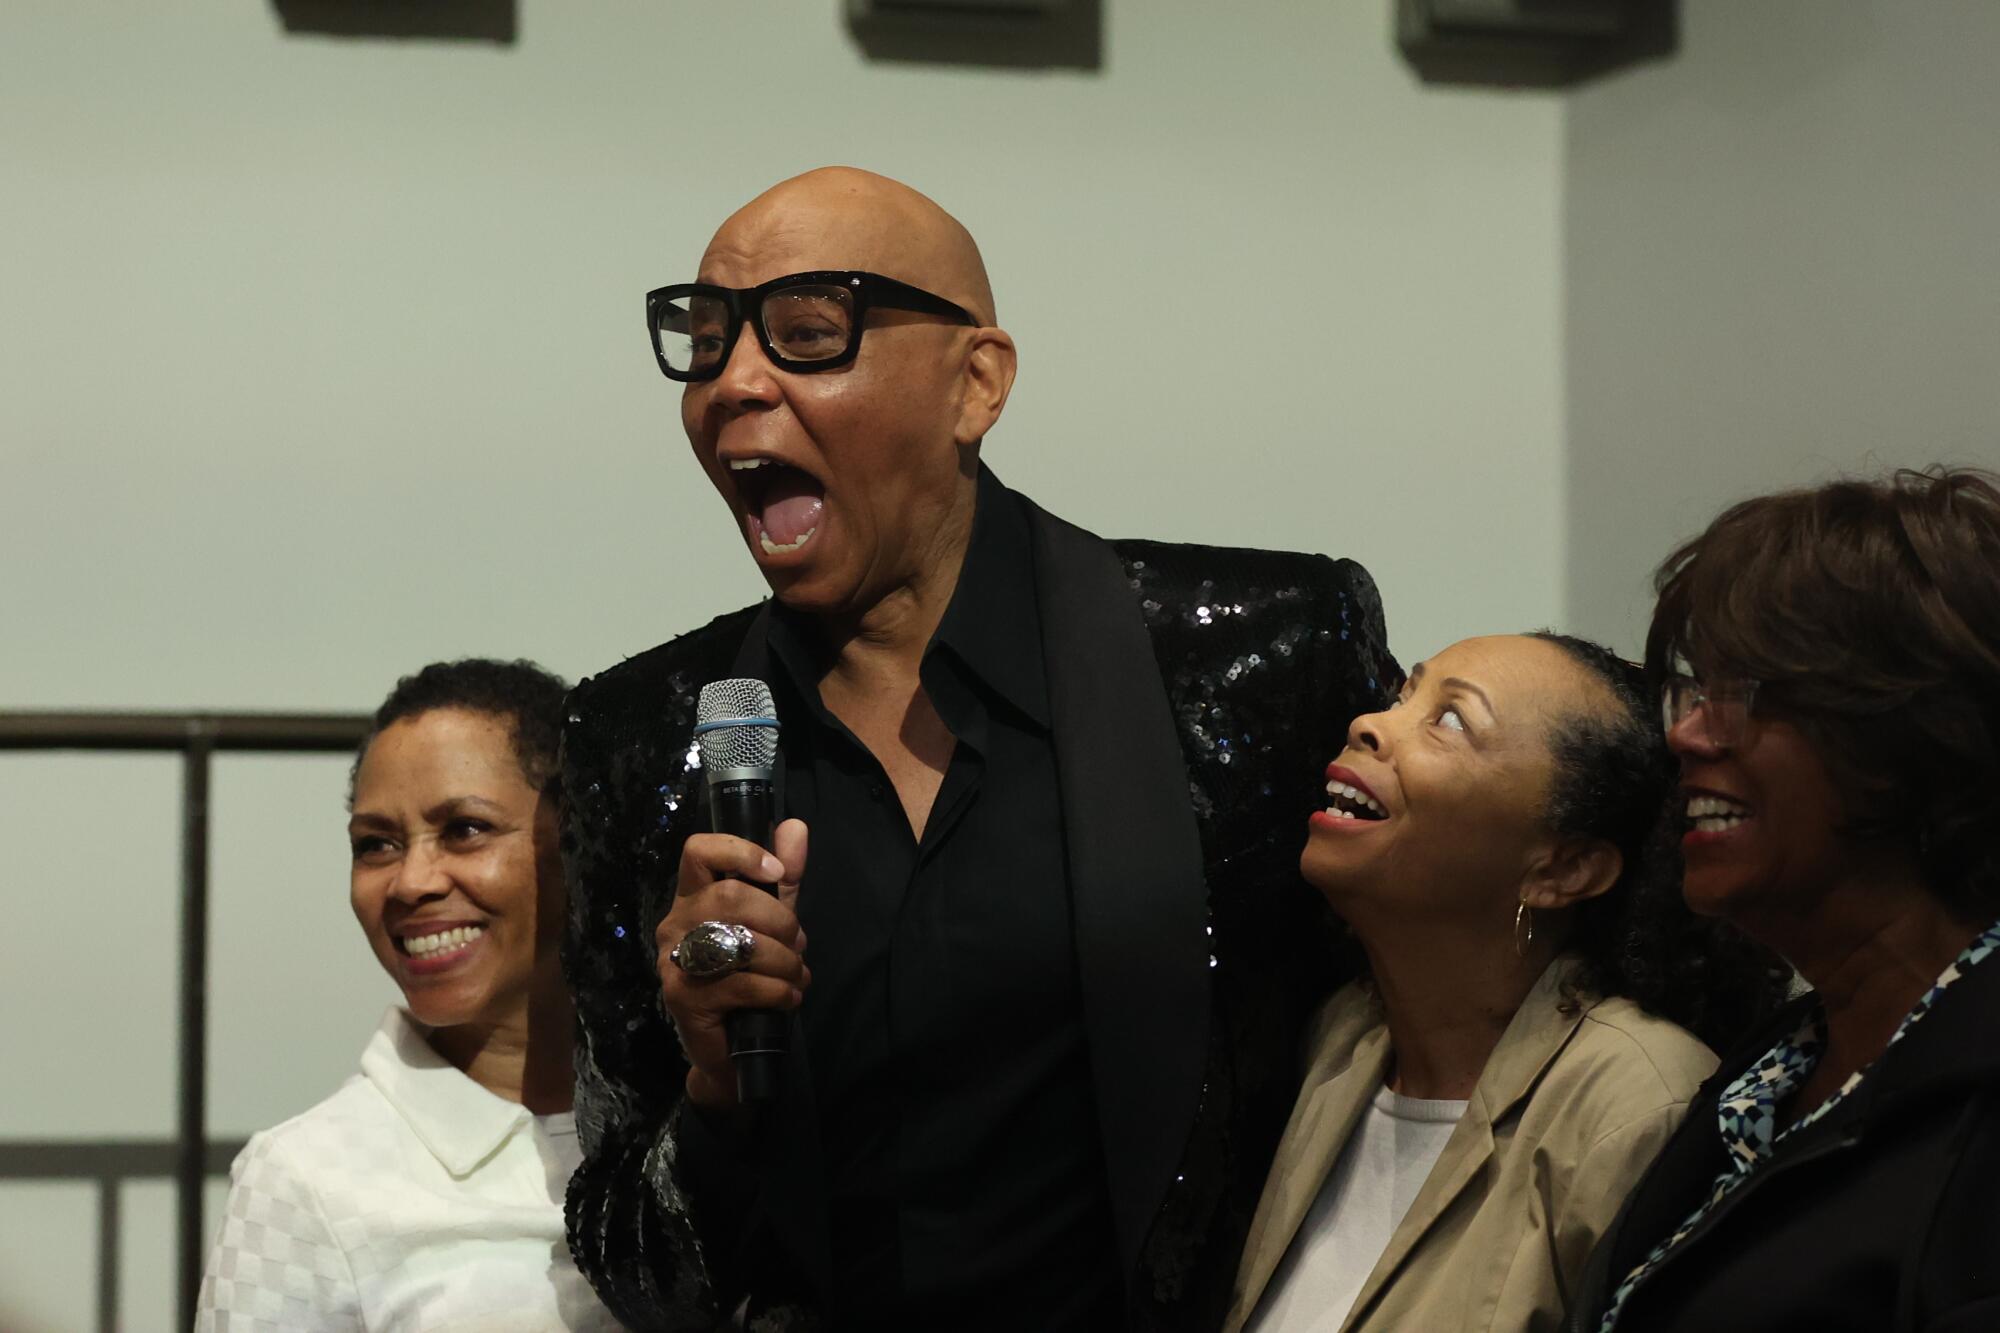 RuPaul laughs while being surrounded by his three sisters while discussing his memoir.